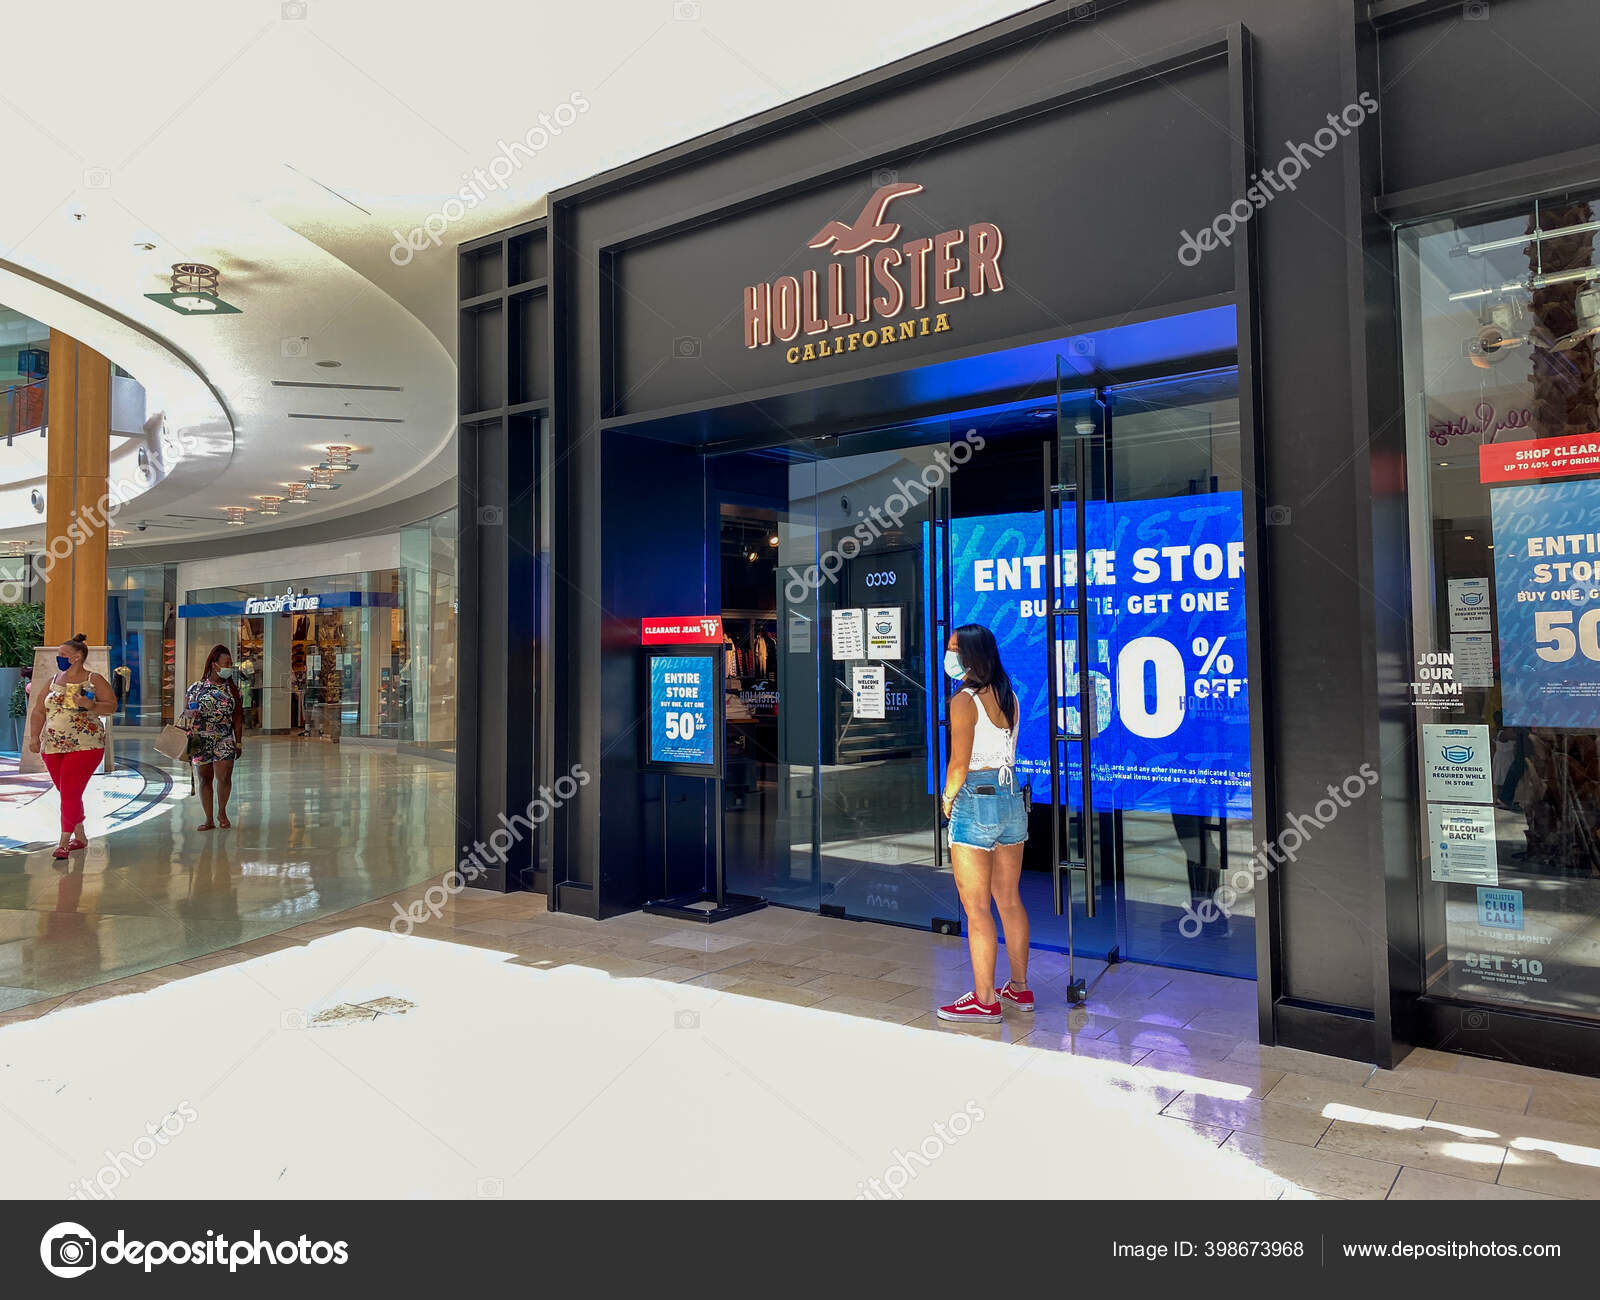 hollister brand in india